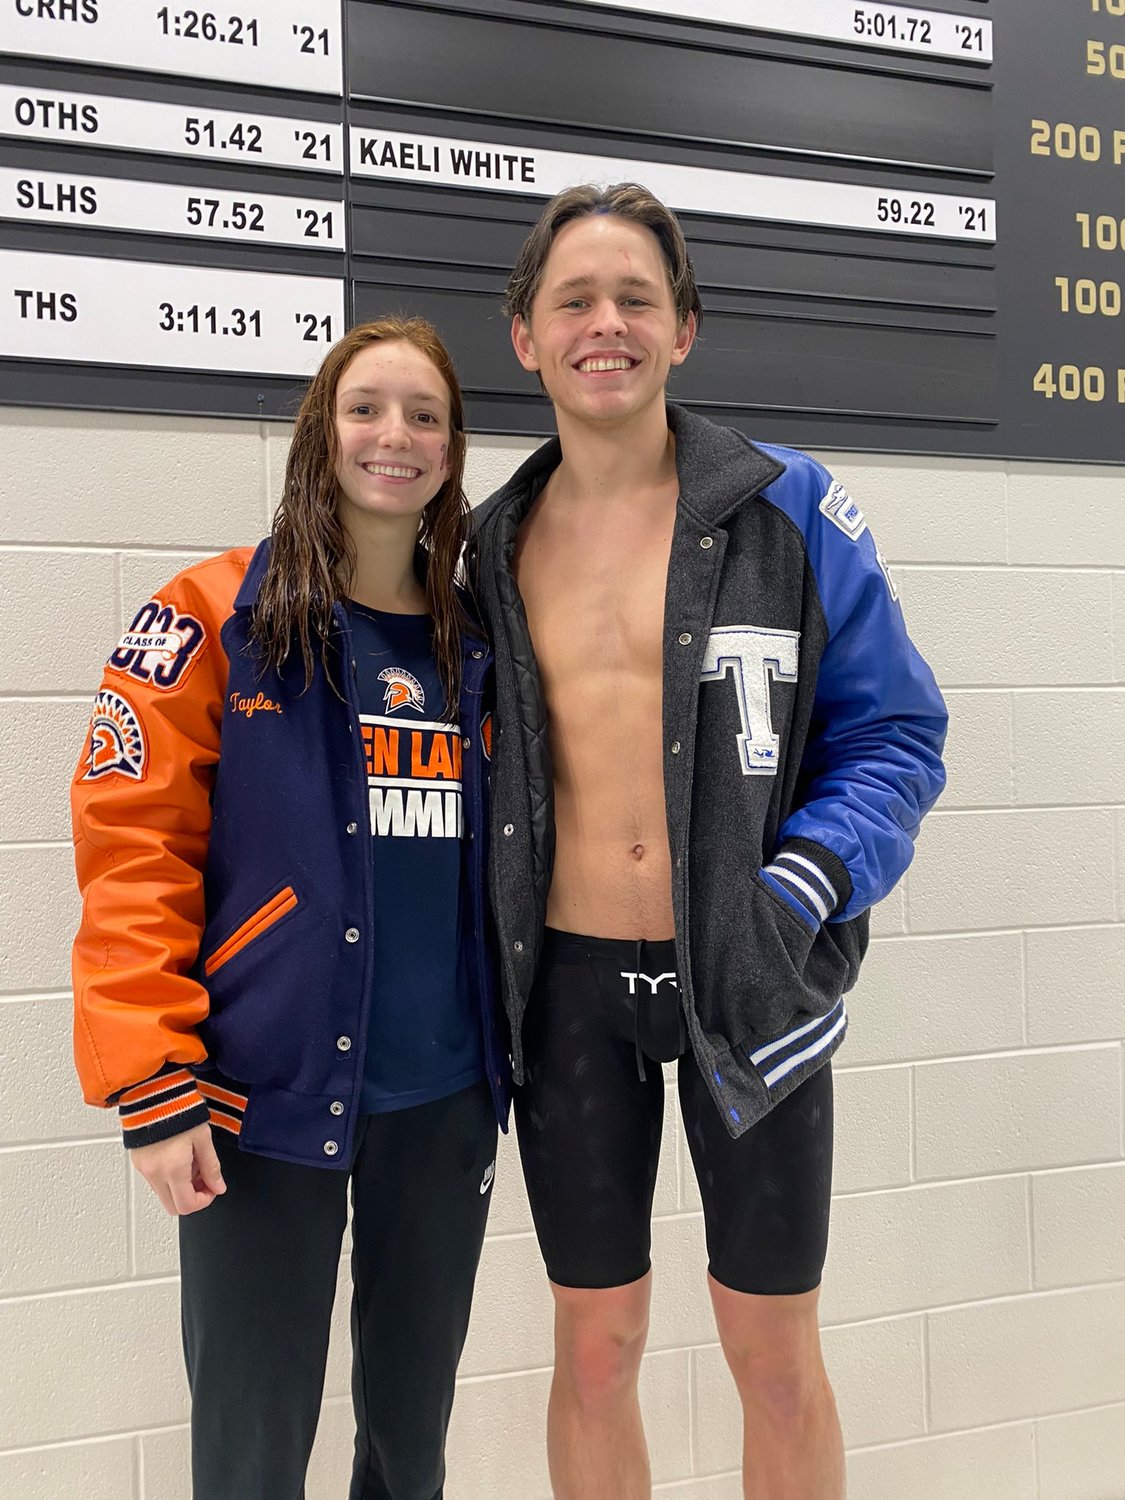 Seven Lake's Taylor Craft and Taylor's Logan Pack were named the athletes of the meet at the District 19-6A swimming and diving meet